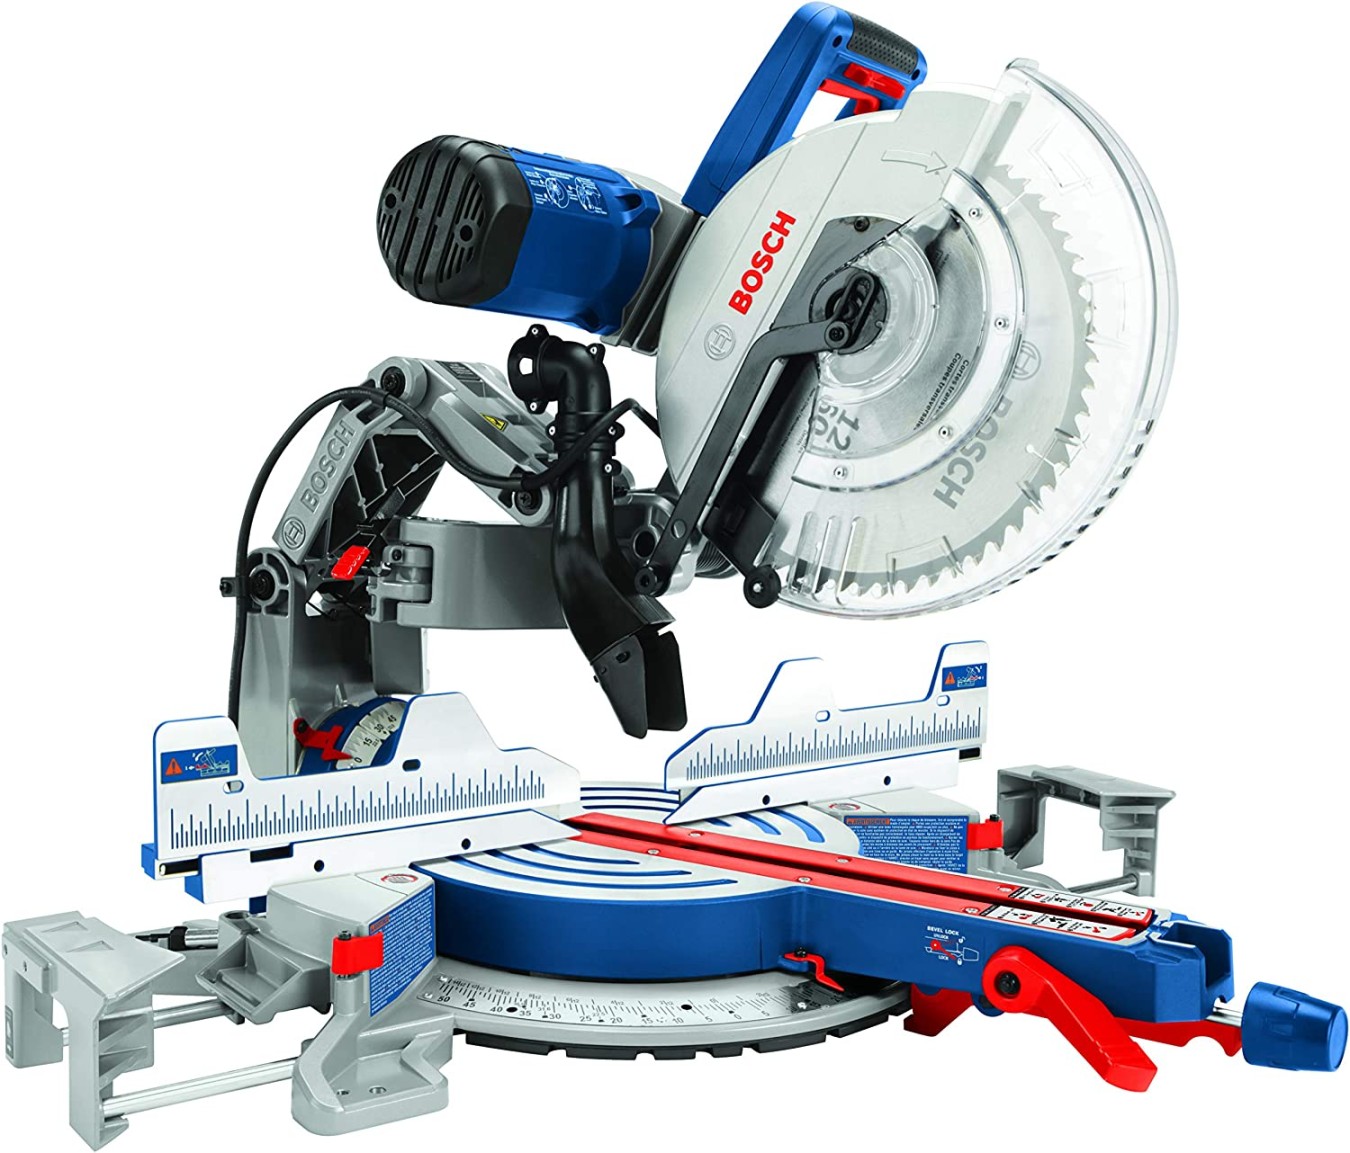 Bosch Miter Saw Review Review () - Woodsmith